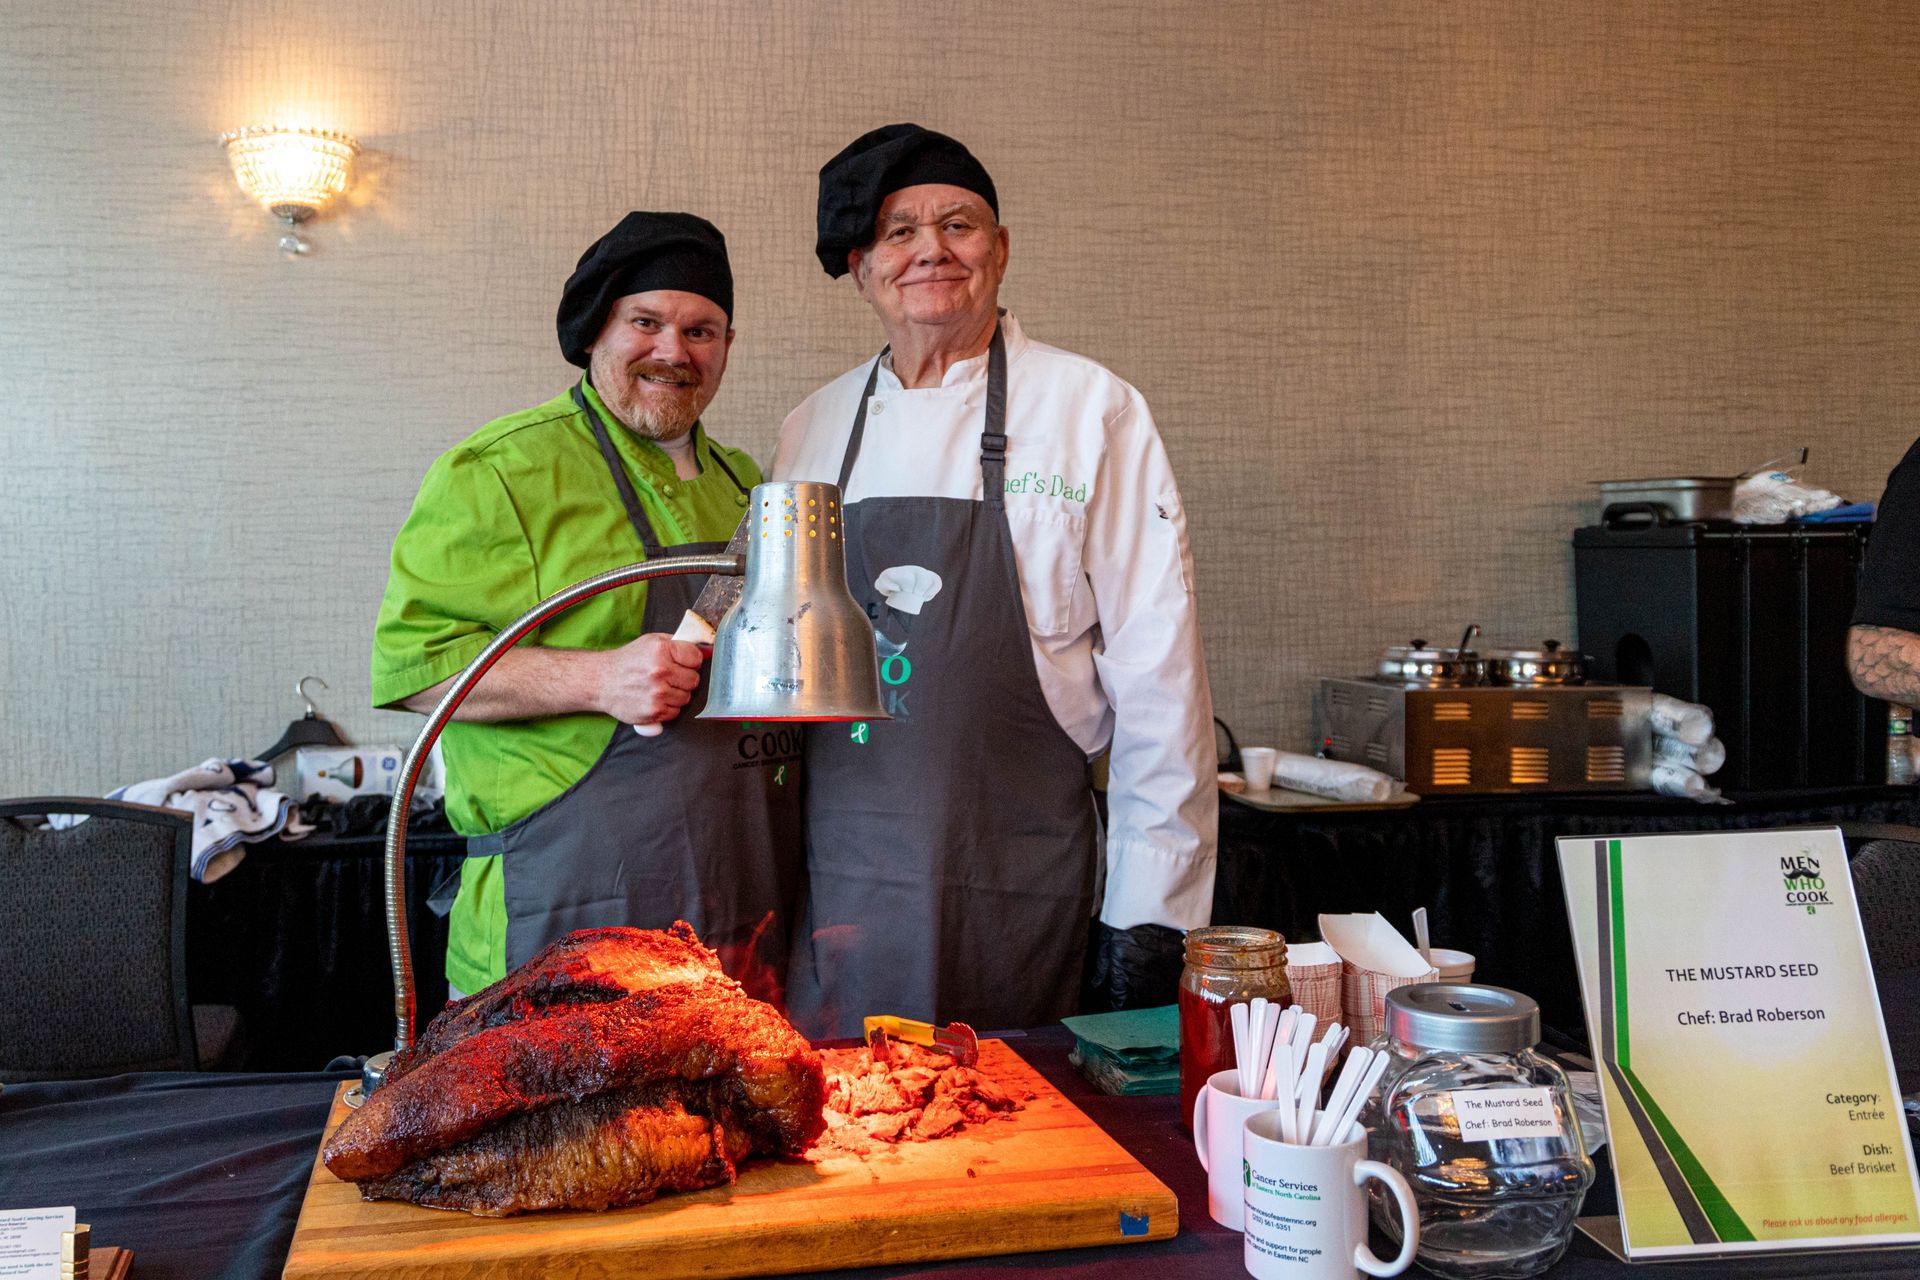 two chefs are standing next to a large piece of meat on a cutting board .